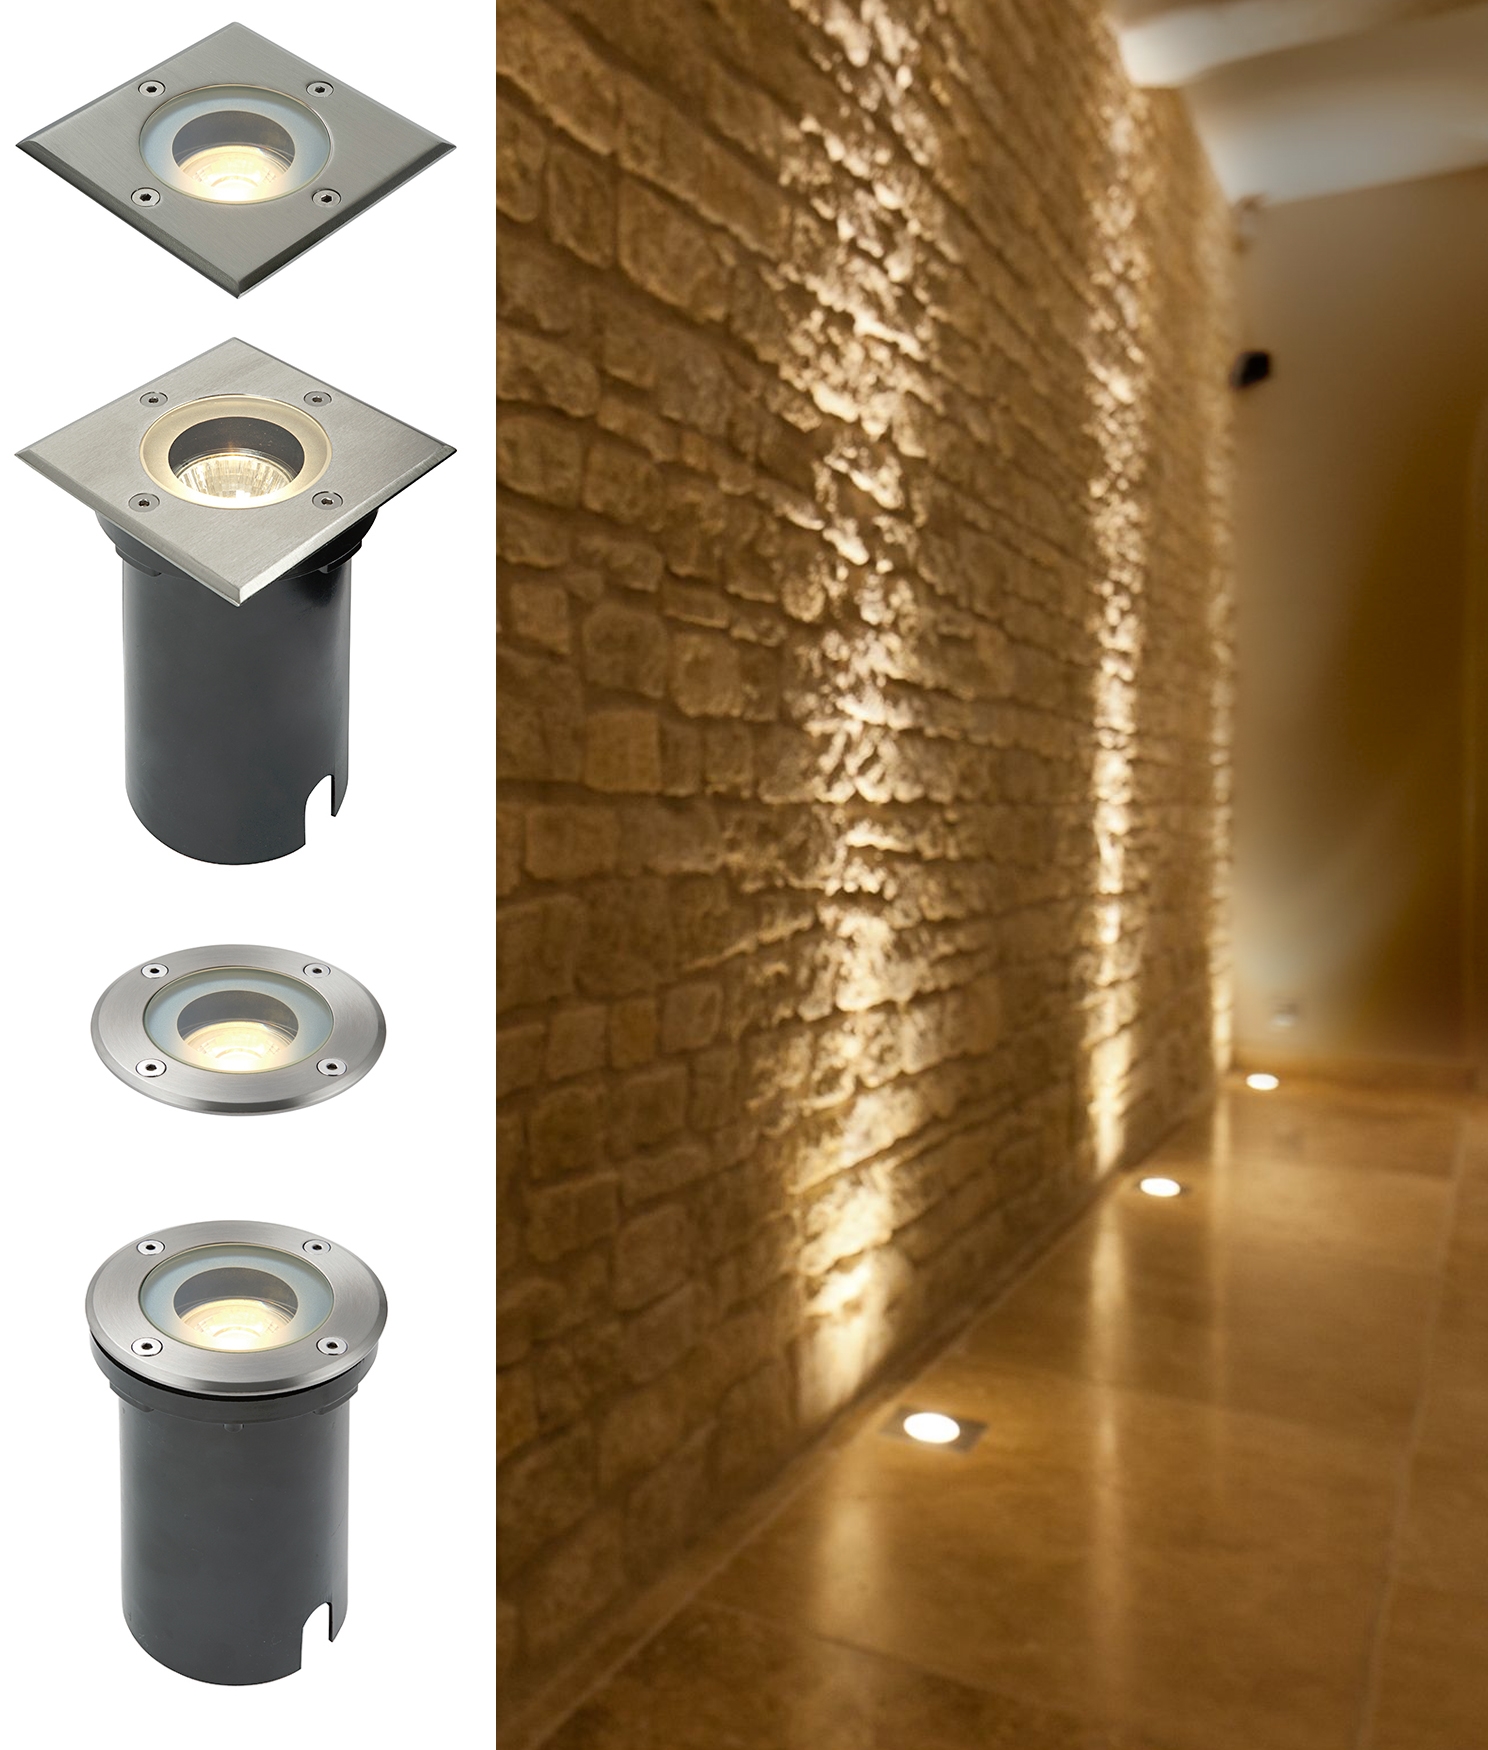 Budget Buried Uplight with LED Lamp for Low Heat, Energy Efficient